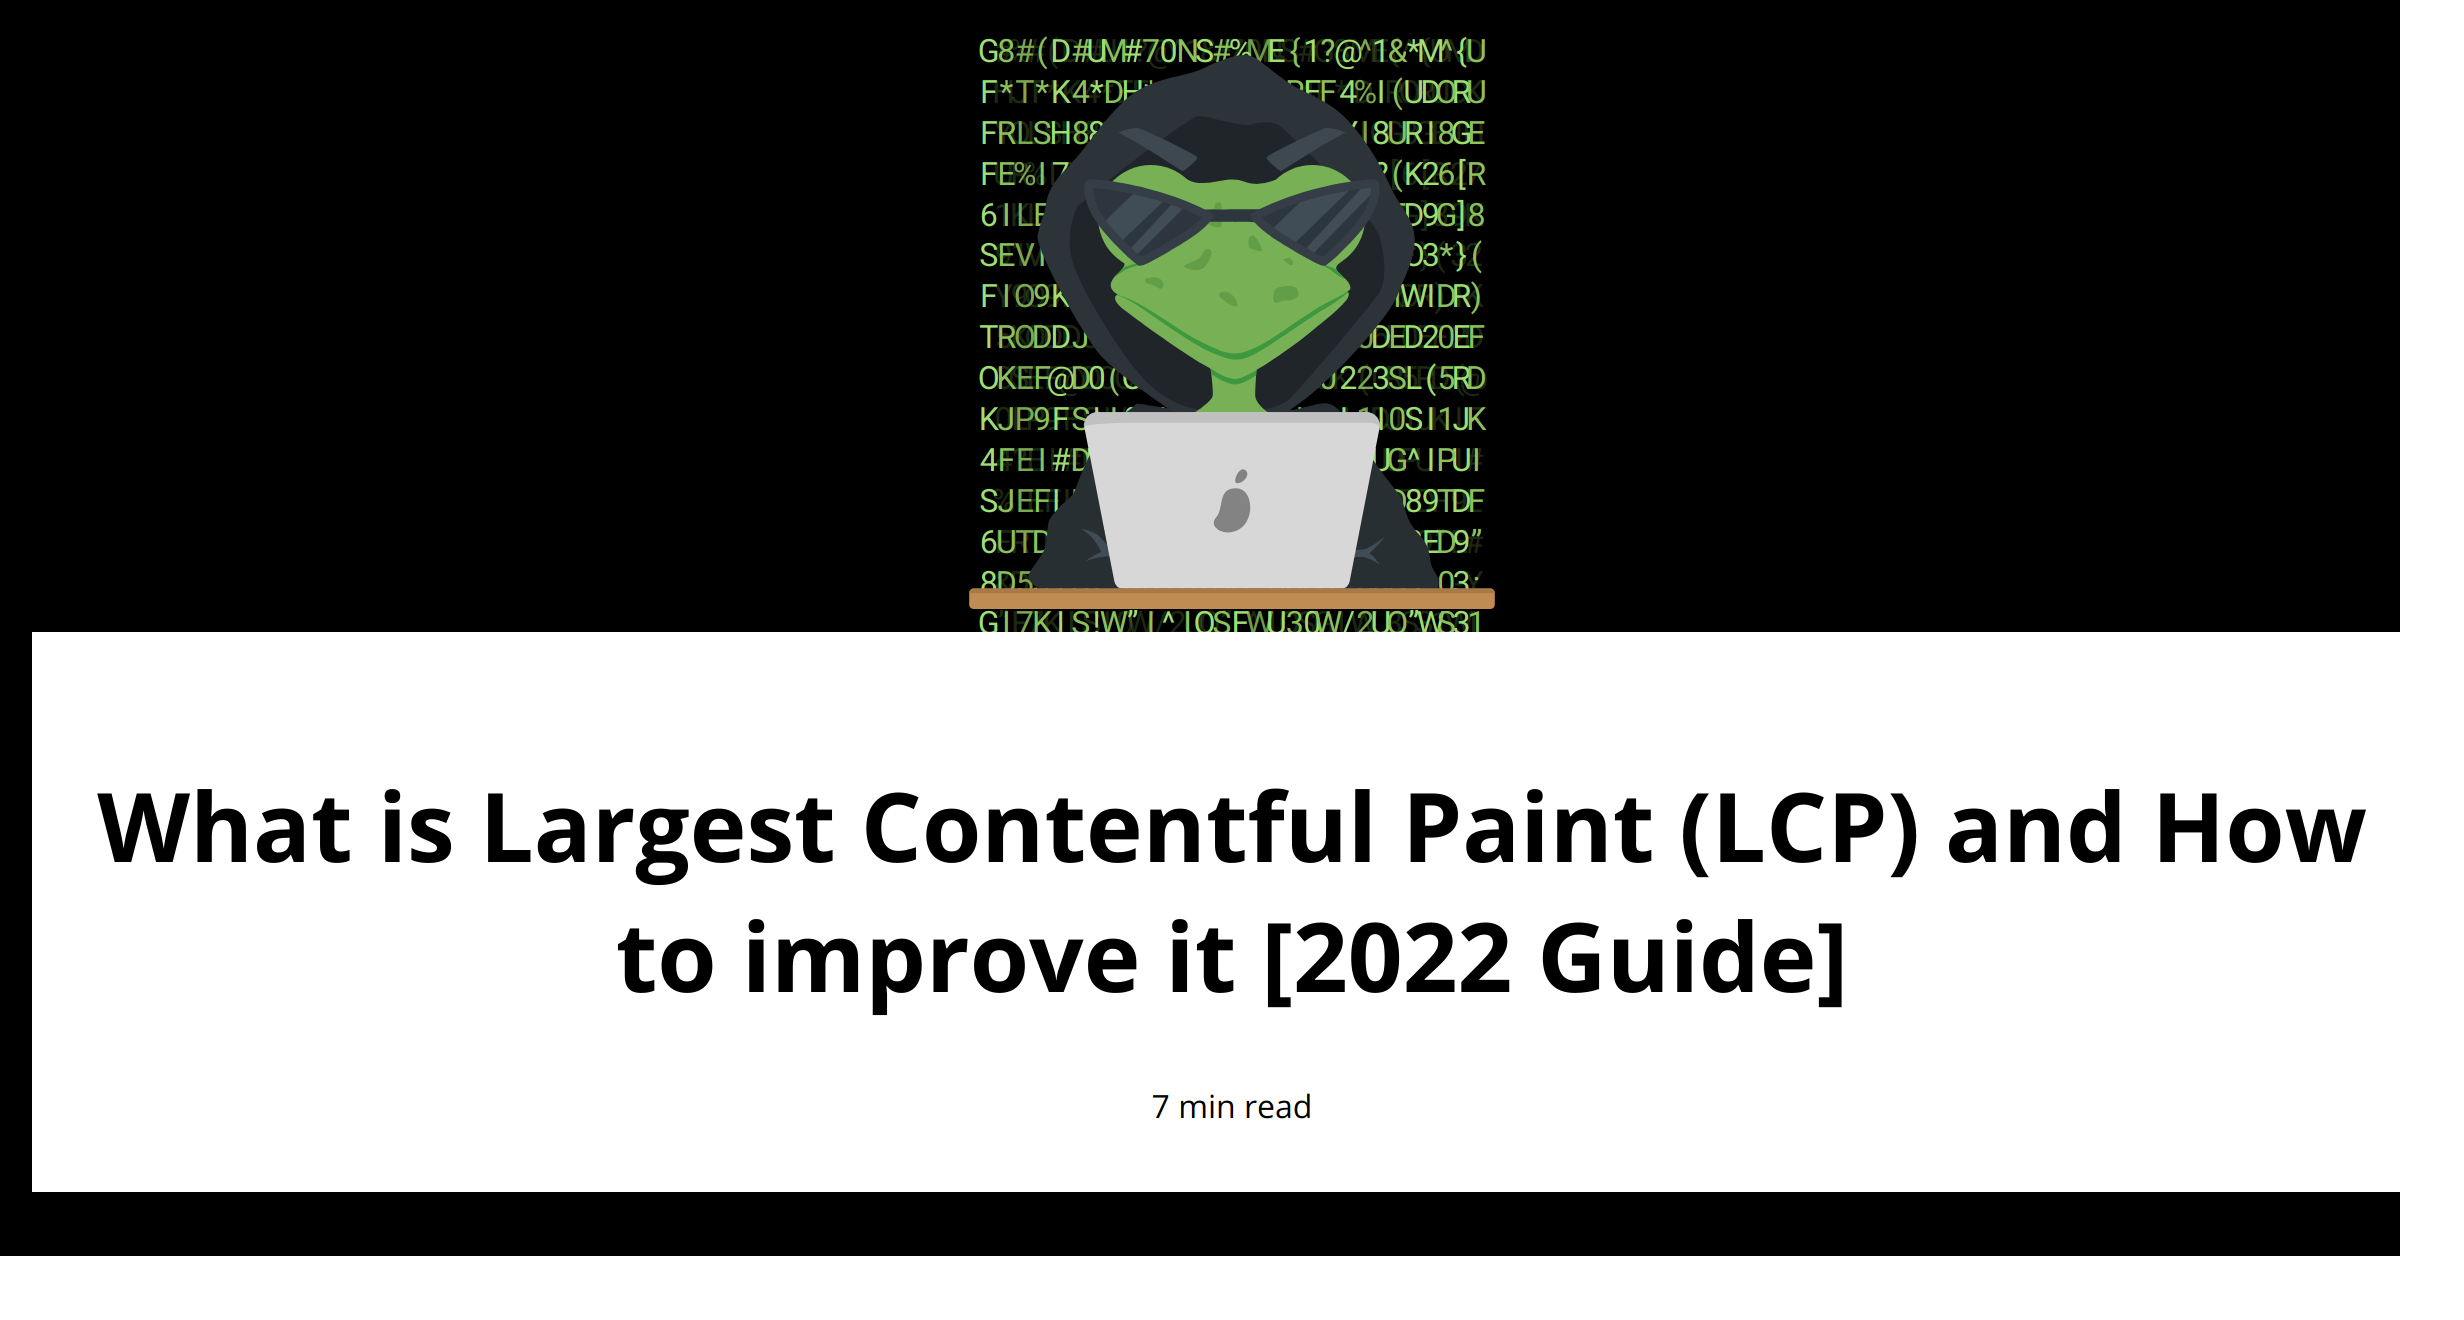 What is Largest Contentful Paint (LCP) and How to improve it [2022 Guide]